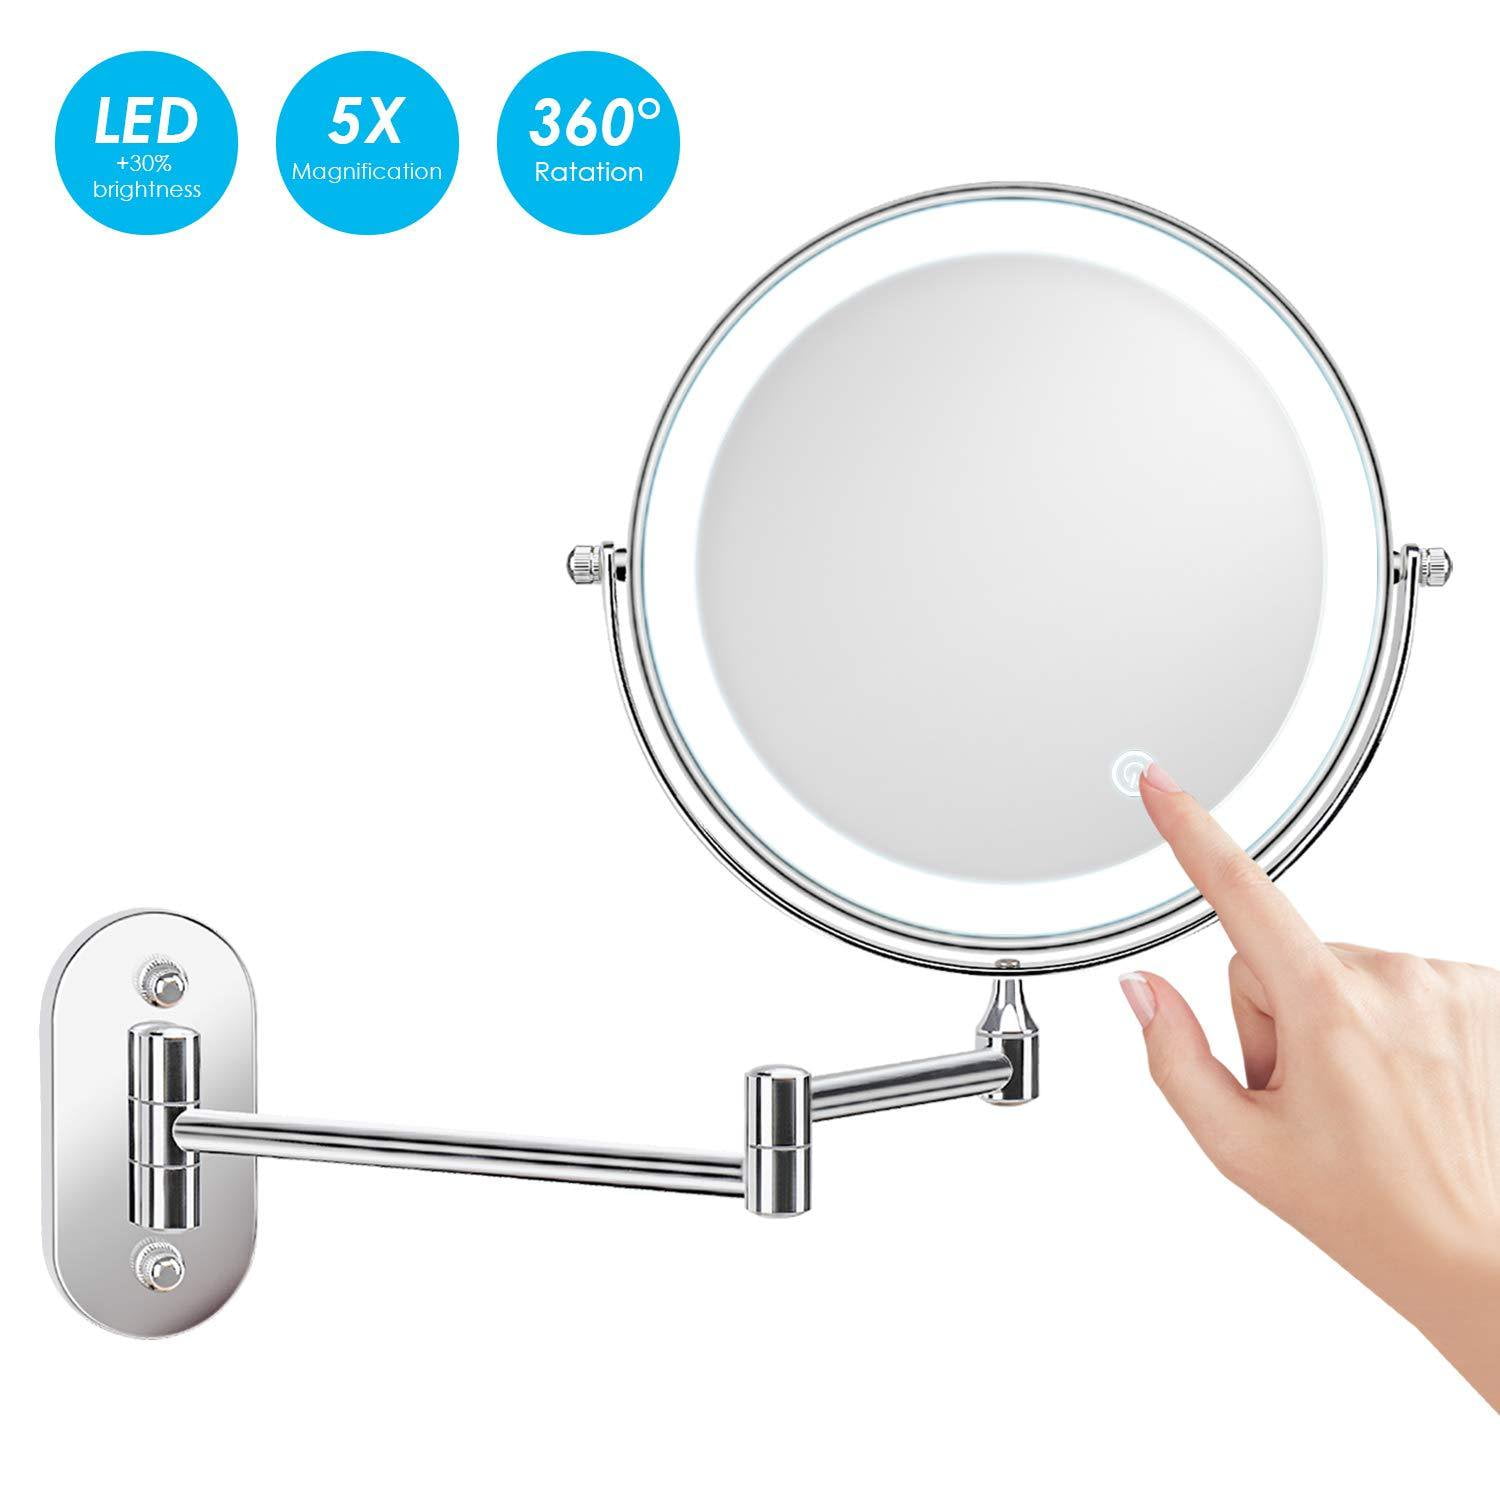 BOTU-TECH Wall-Mounted Makeup Mirror Shaving Mirror LED Lighted Mirror Bathroom Mirror for Hotel Vanity Adjustable Extendable Square 8inch 3x Magnifying Surface Chrome Finish（Sliver 